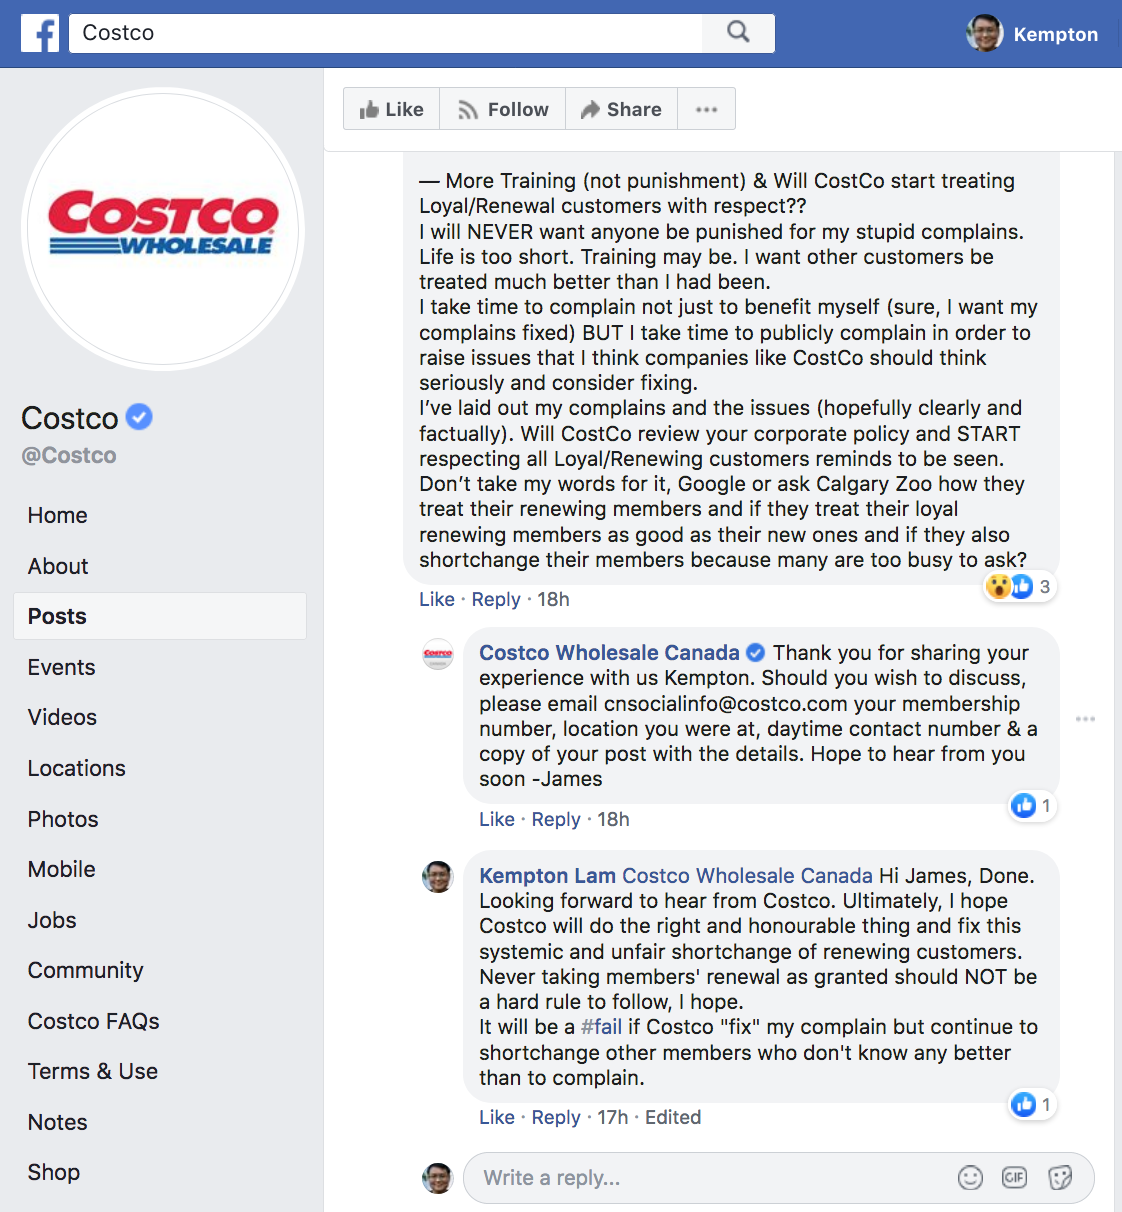 20191106 Why does Costco shortchange loyal renewing customers? - Pix 02